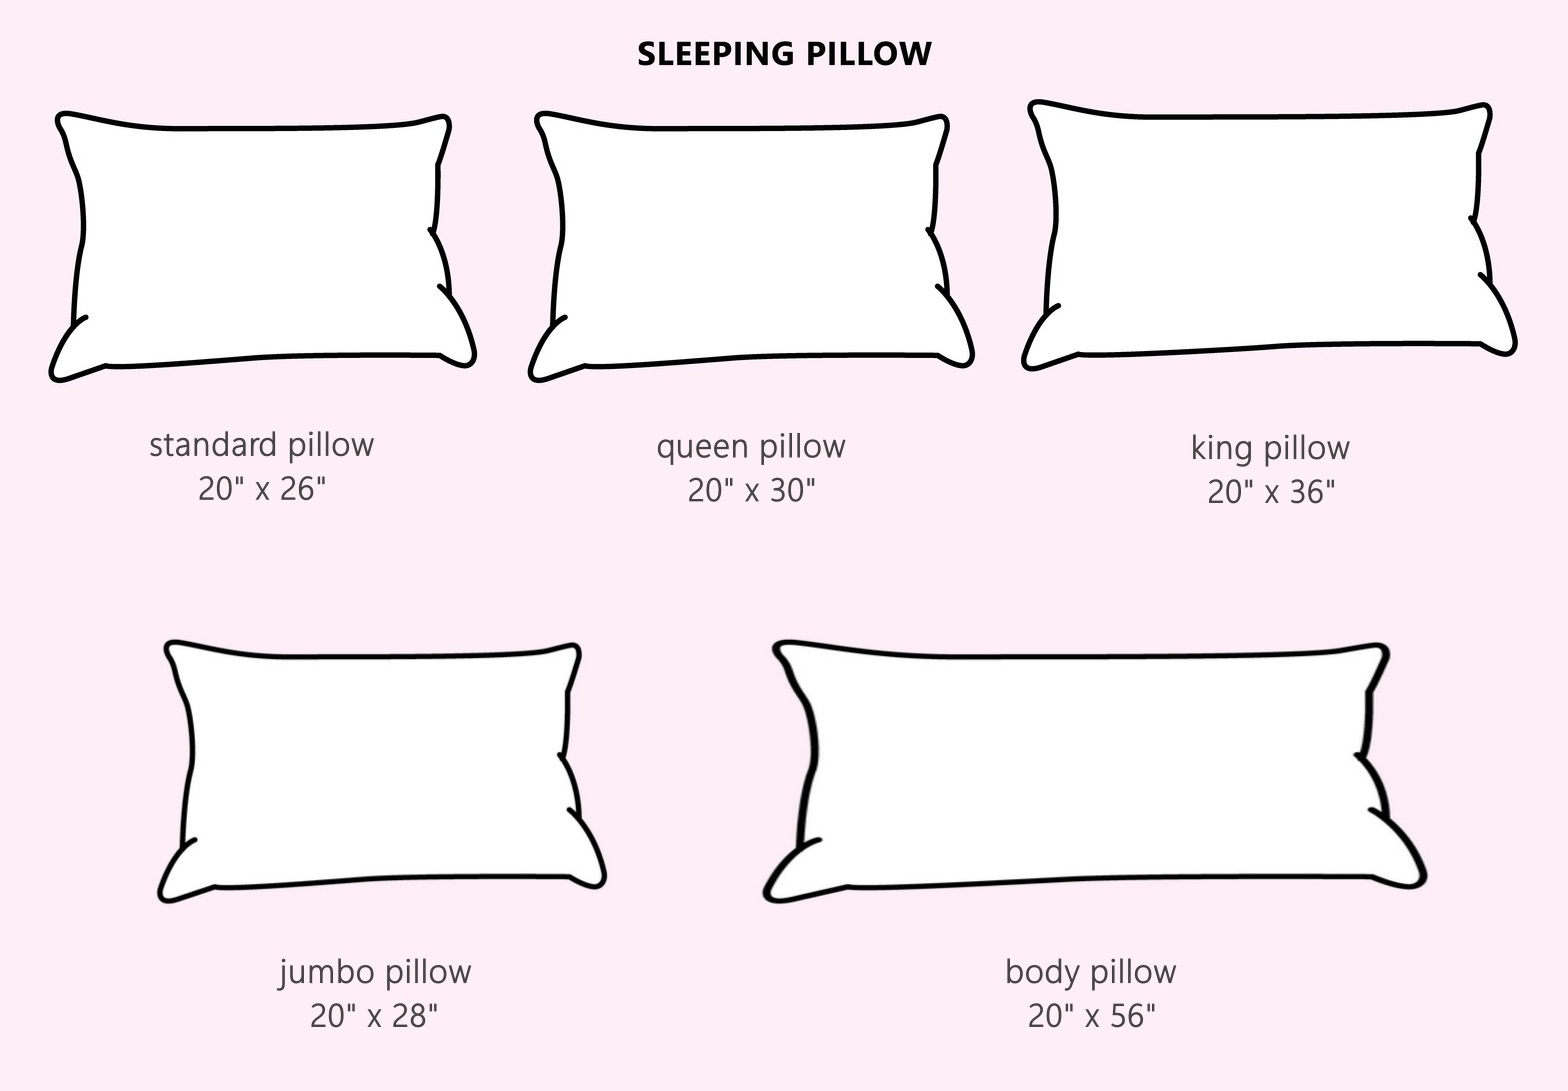 Which Pillow Is Best For Me? 5 Types And Tips To Help You Choose